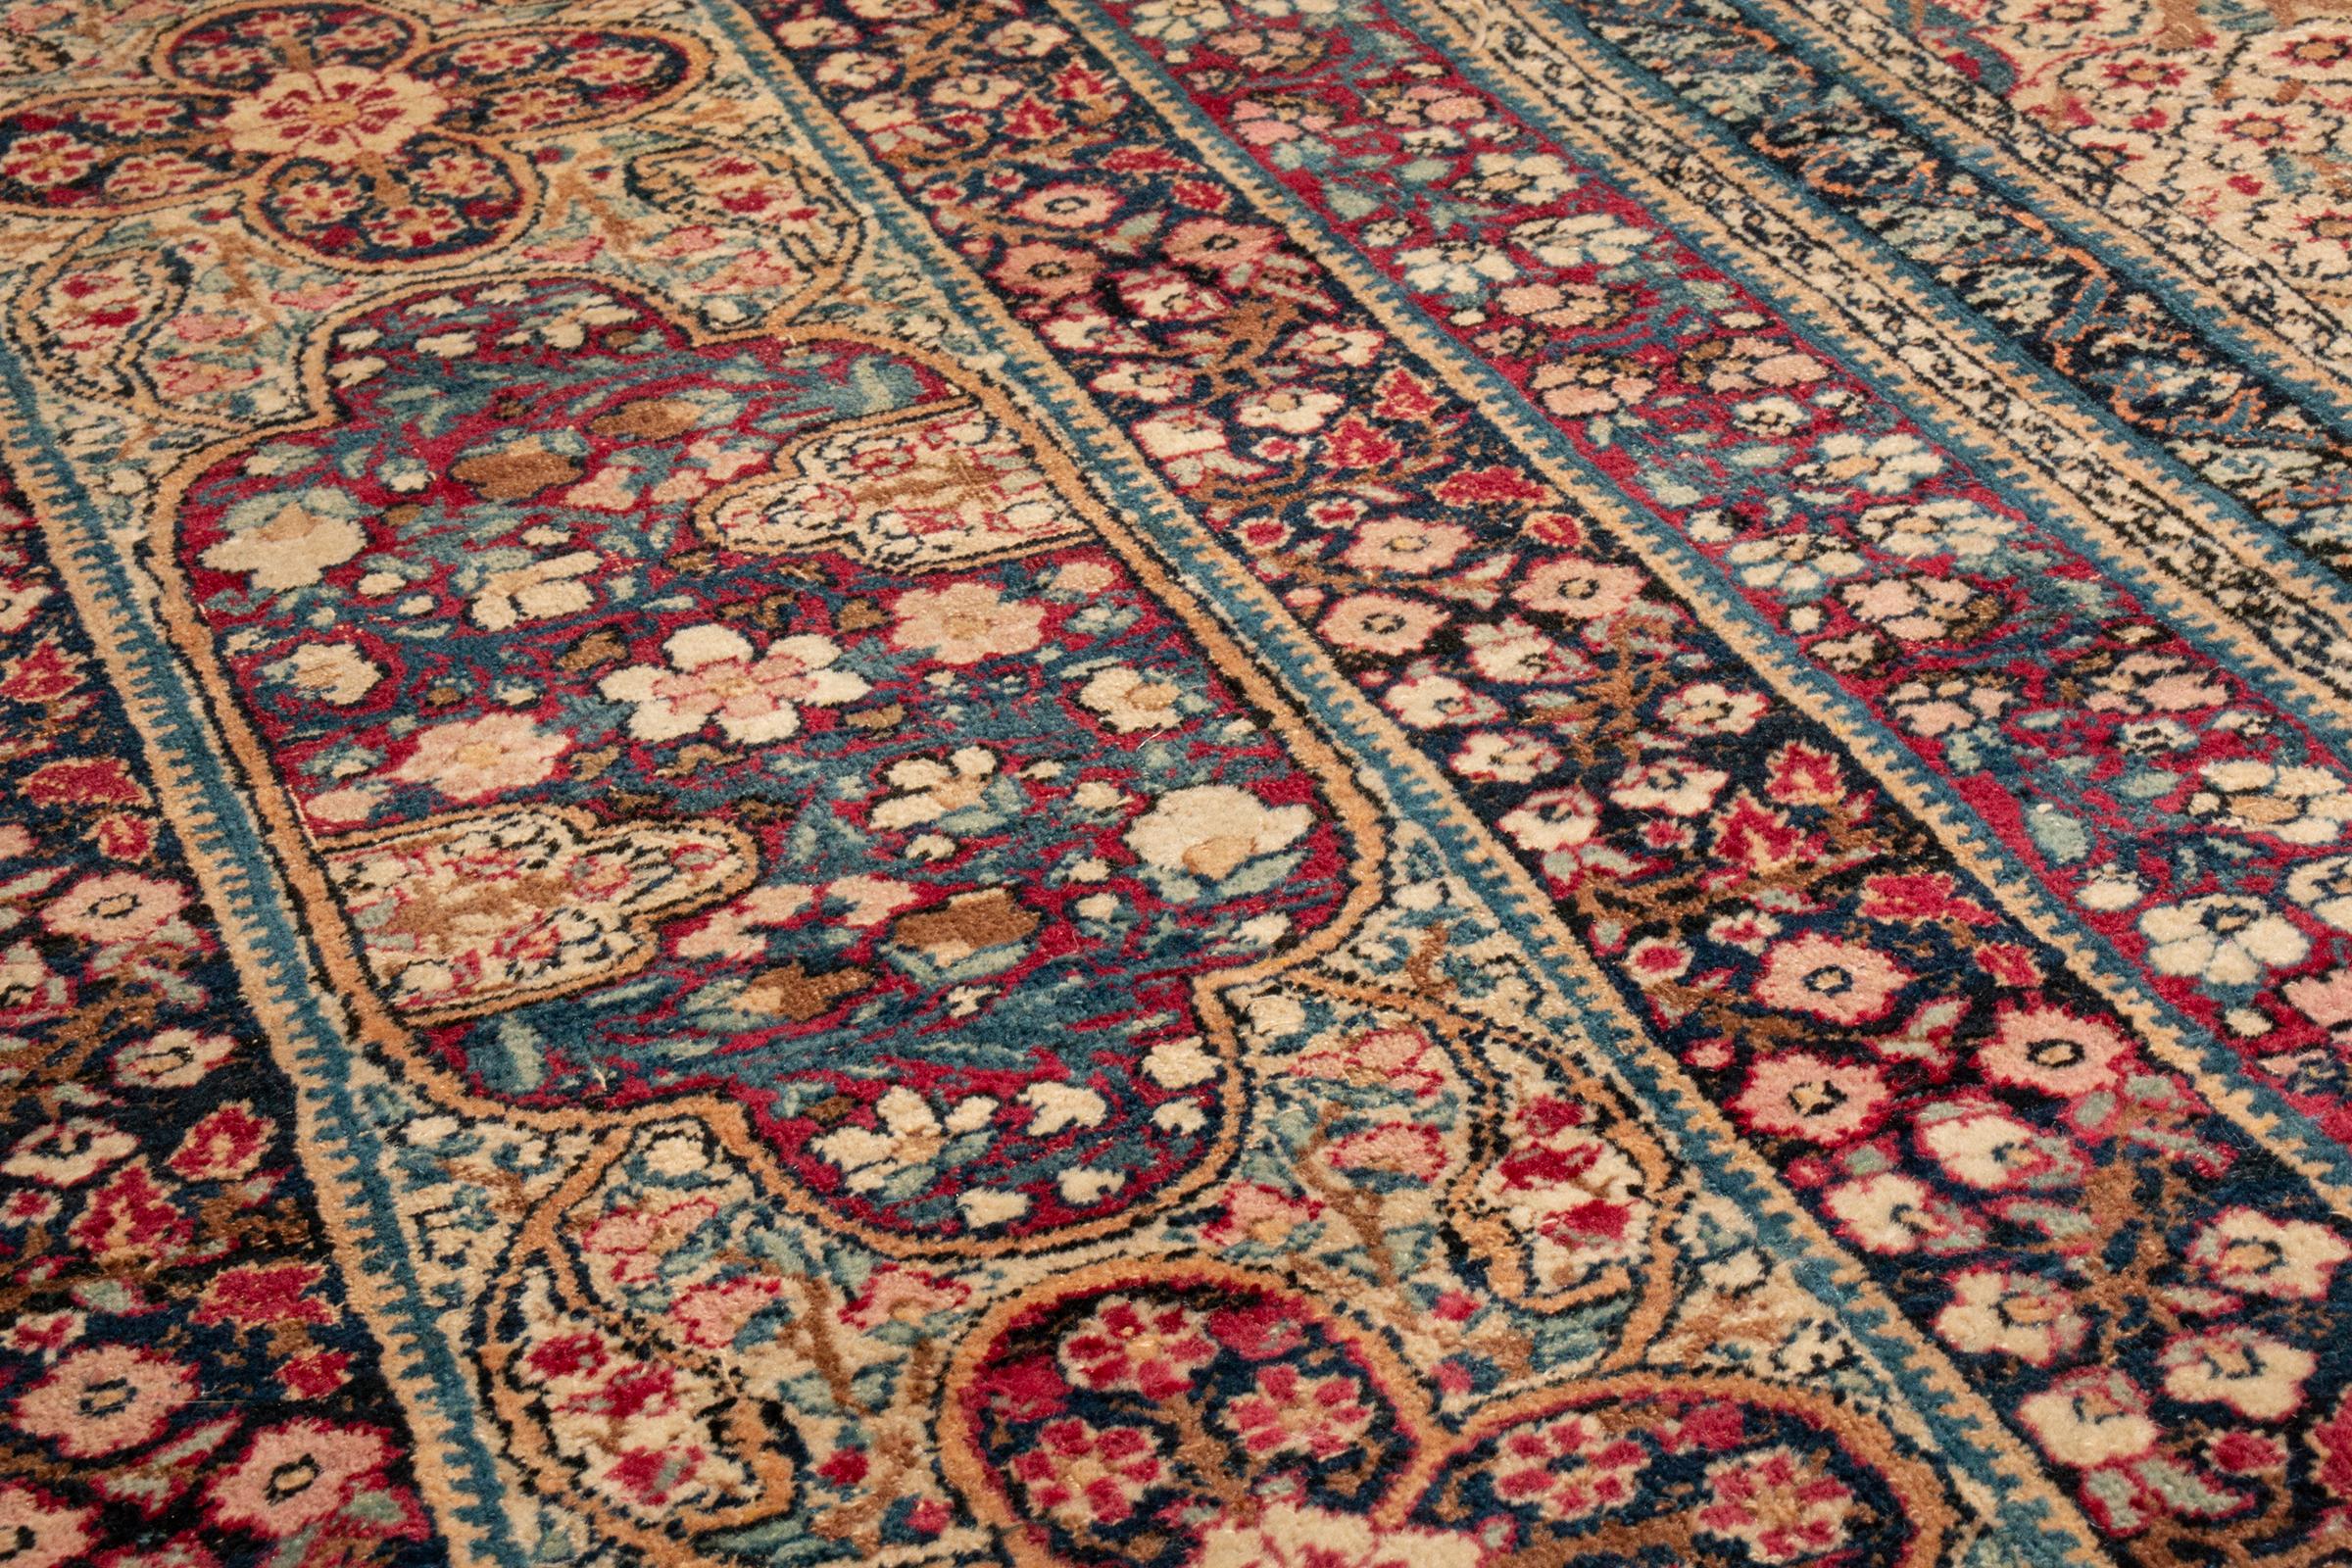 Hand-Knotted Rare Signed Antique Kerman Persian Rug by Aboul Ghasem Kermani For Sale